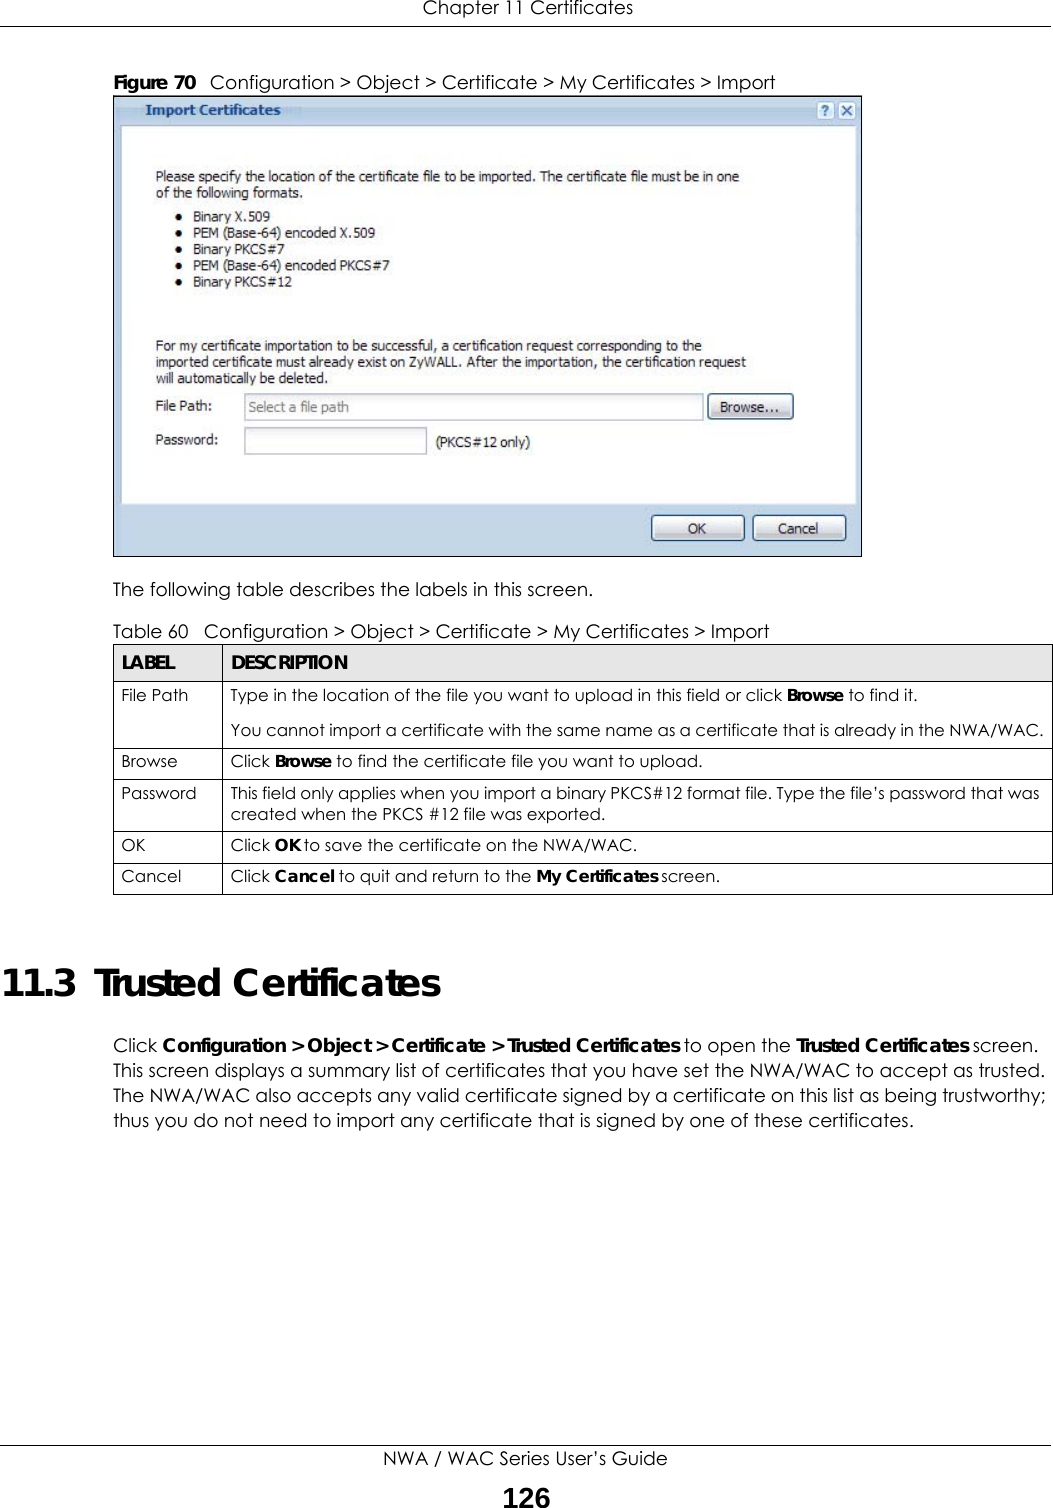  Chapter 11 CertificatesNWA / WAC Series User’s Guide126Figure 70   Configuration &gt; Object &gt; Certificate &gt; My Certificates &gt; ImportThe following table describes the labels in this screen.  11.3  Trusted CertificatesClick Configuration &gt; Object &gt; Certificate &gt; Trusted Certificates to open the Trusted Certificates screen. This screen displays a summary list of certificates that you have set the NWA/WAC to accept as trusted. The NWA/WAC also accepts any valid certificate signed by a certificate on this list as being trustworthy; thus you do not need to import any certificate that is signed by one of these certificates. Table 60   Configuration &gt; Object &gt; Certificate &gt; My Certificates &gt; ImportLABEL DESCRIPTIONFile Path  Type in the location of the file you want to upload in this field or click Browse to find it.You cannot import a certificate with the same name as a certificate that is already in the NWA/WAC.Browse Click Browse to find the certificate file you want to upload. Password This field only applies when you import a binary PKCS#12 format file. Type the file’s password that was created when the PKCS #12 file was exported. OK Click OK to save the certificate on the NWA/WAC.Cancel Click Cancel to quit and return to the My Certificates screen.